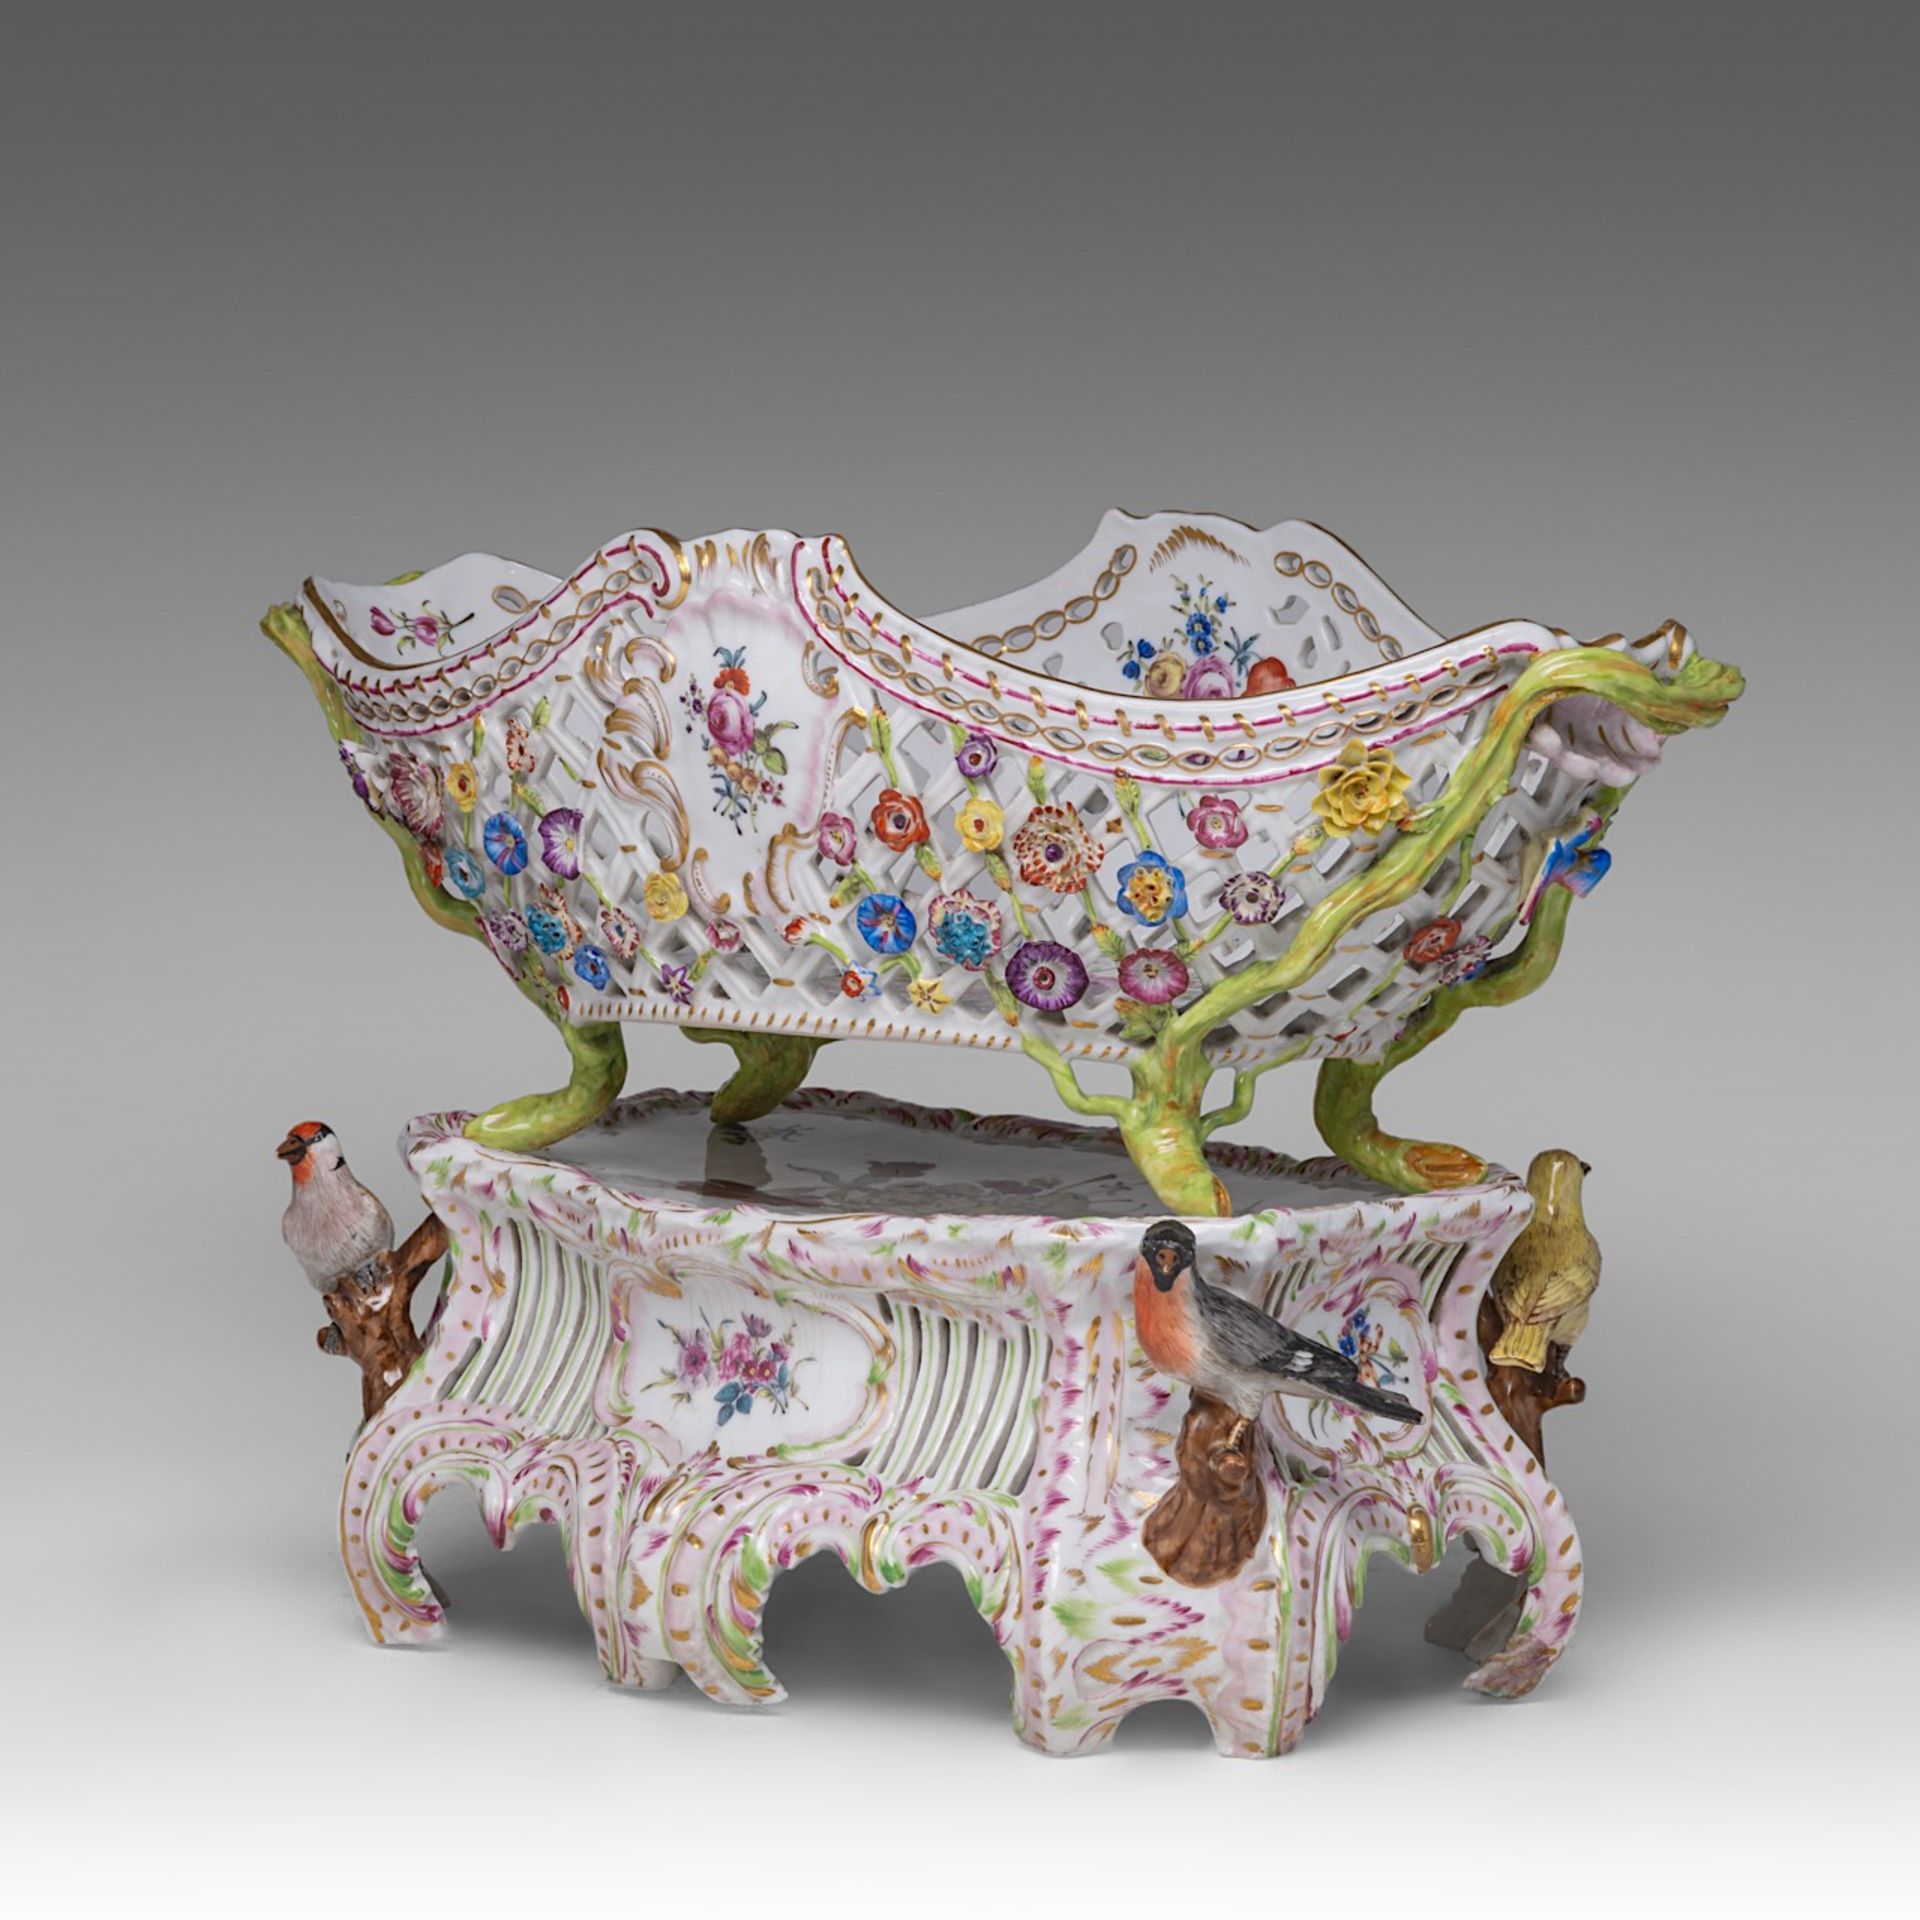 A polychrome Saxony porcelain basket on stand, decorated with modelled birds and flowers, H 33 - W 4 - Image 2 of 12